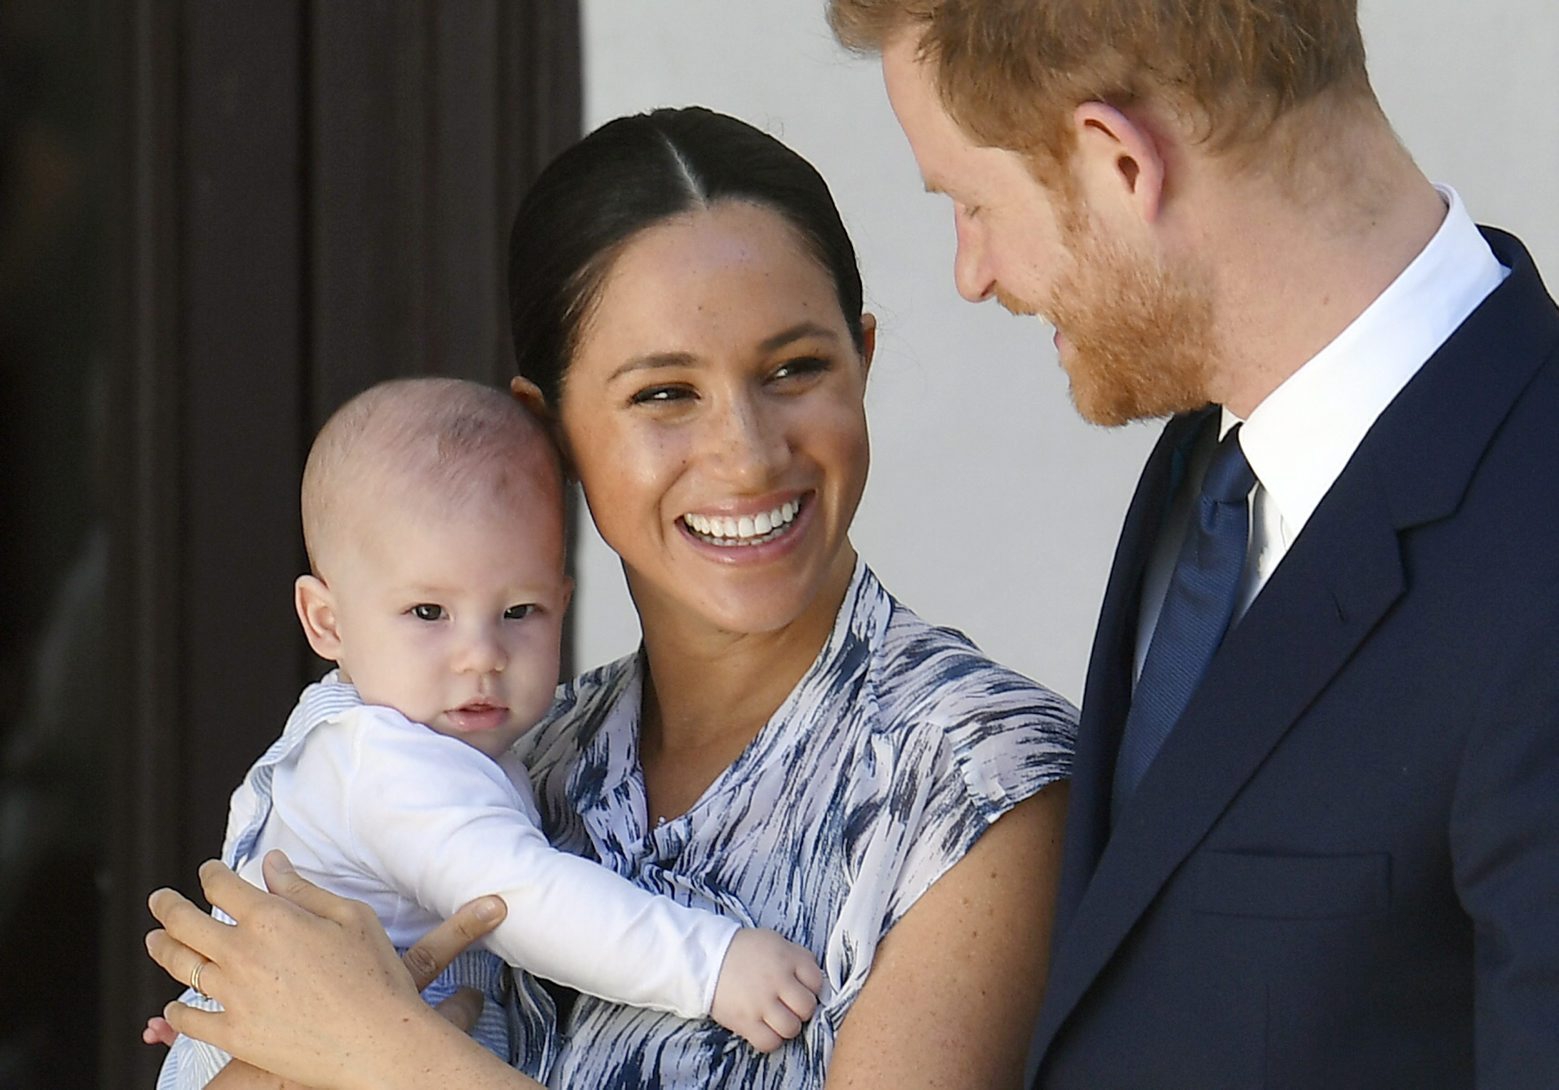 epa08139592 (FILE) - Britain's Prince Harry (R), Duke of Sussex and his wife Meghan, Duchess of Sussex, holding their son Archie, visit the Desmond & Leah Tutu Legacy Foundation in Cape Town, South Africa, 25 September 2019 (reissued 18 January 2020). Prince Harry and his wife Meghan, who in a statement on 08 January announced that they will step back as 'senior' royal family members and work to become financially independent, will no longer use their HRH titles, Buckingham Palace said in a statement on 18 January 2020. Media reports also state that the couple plans to pay back some 2.8 million euro which were payed by taxes for the renovation of their Cottage home in Britain.  EPA/TOBY MELVILLE / POOL (FILE) BRITAIN ROYALTY